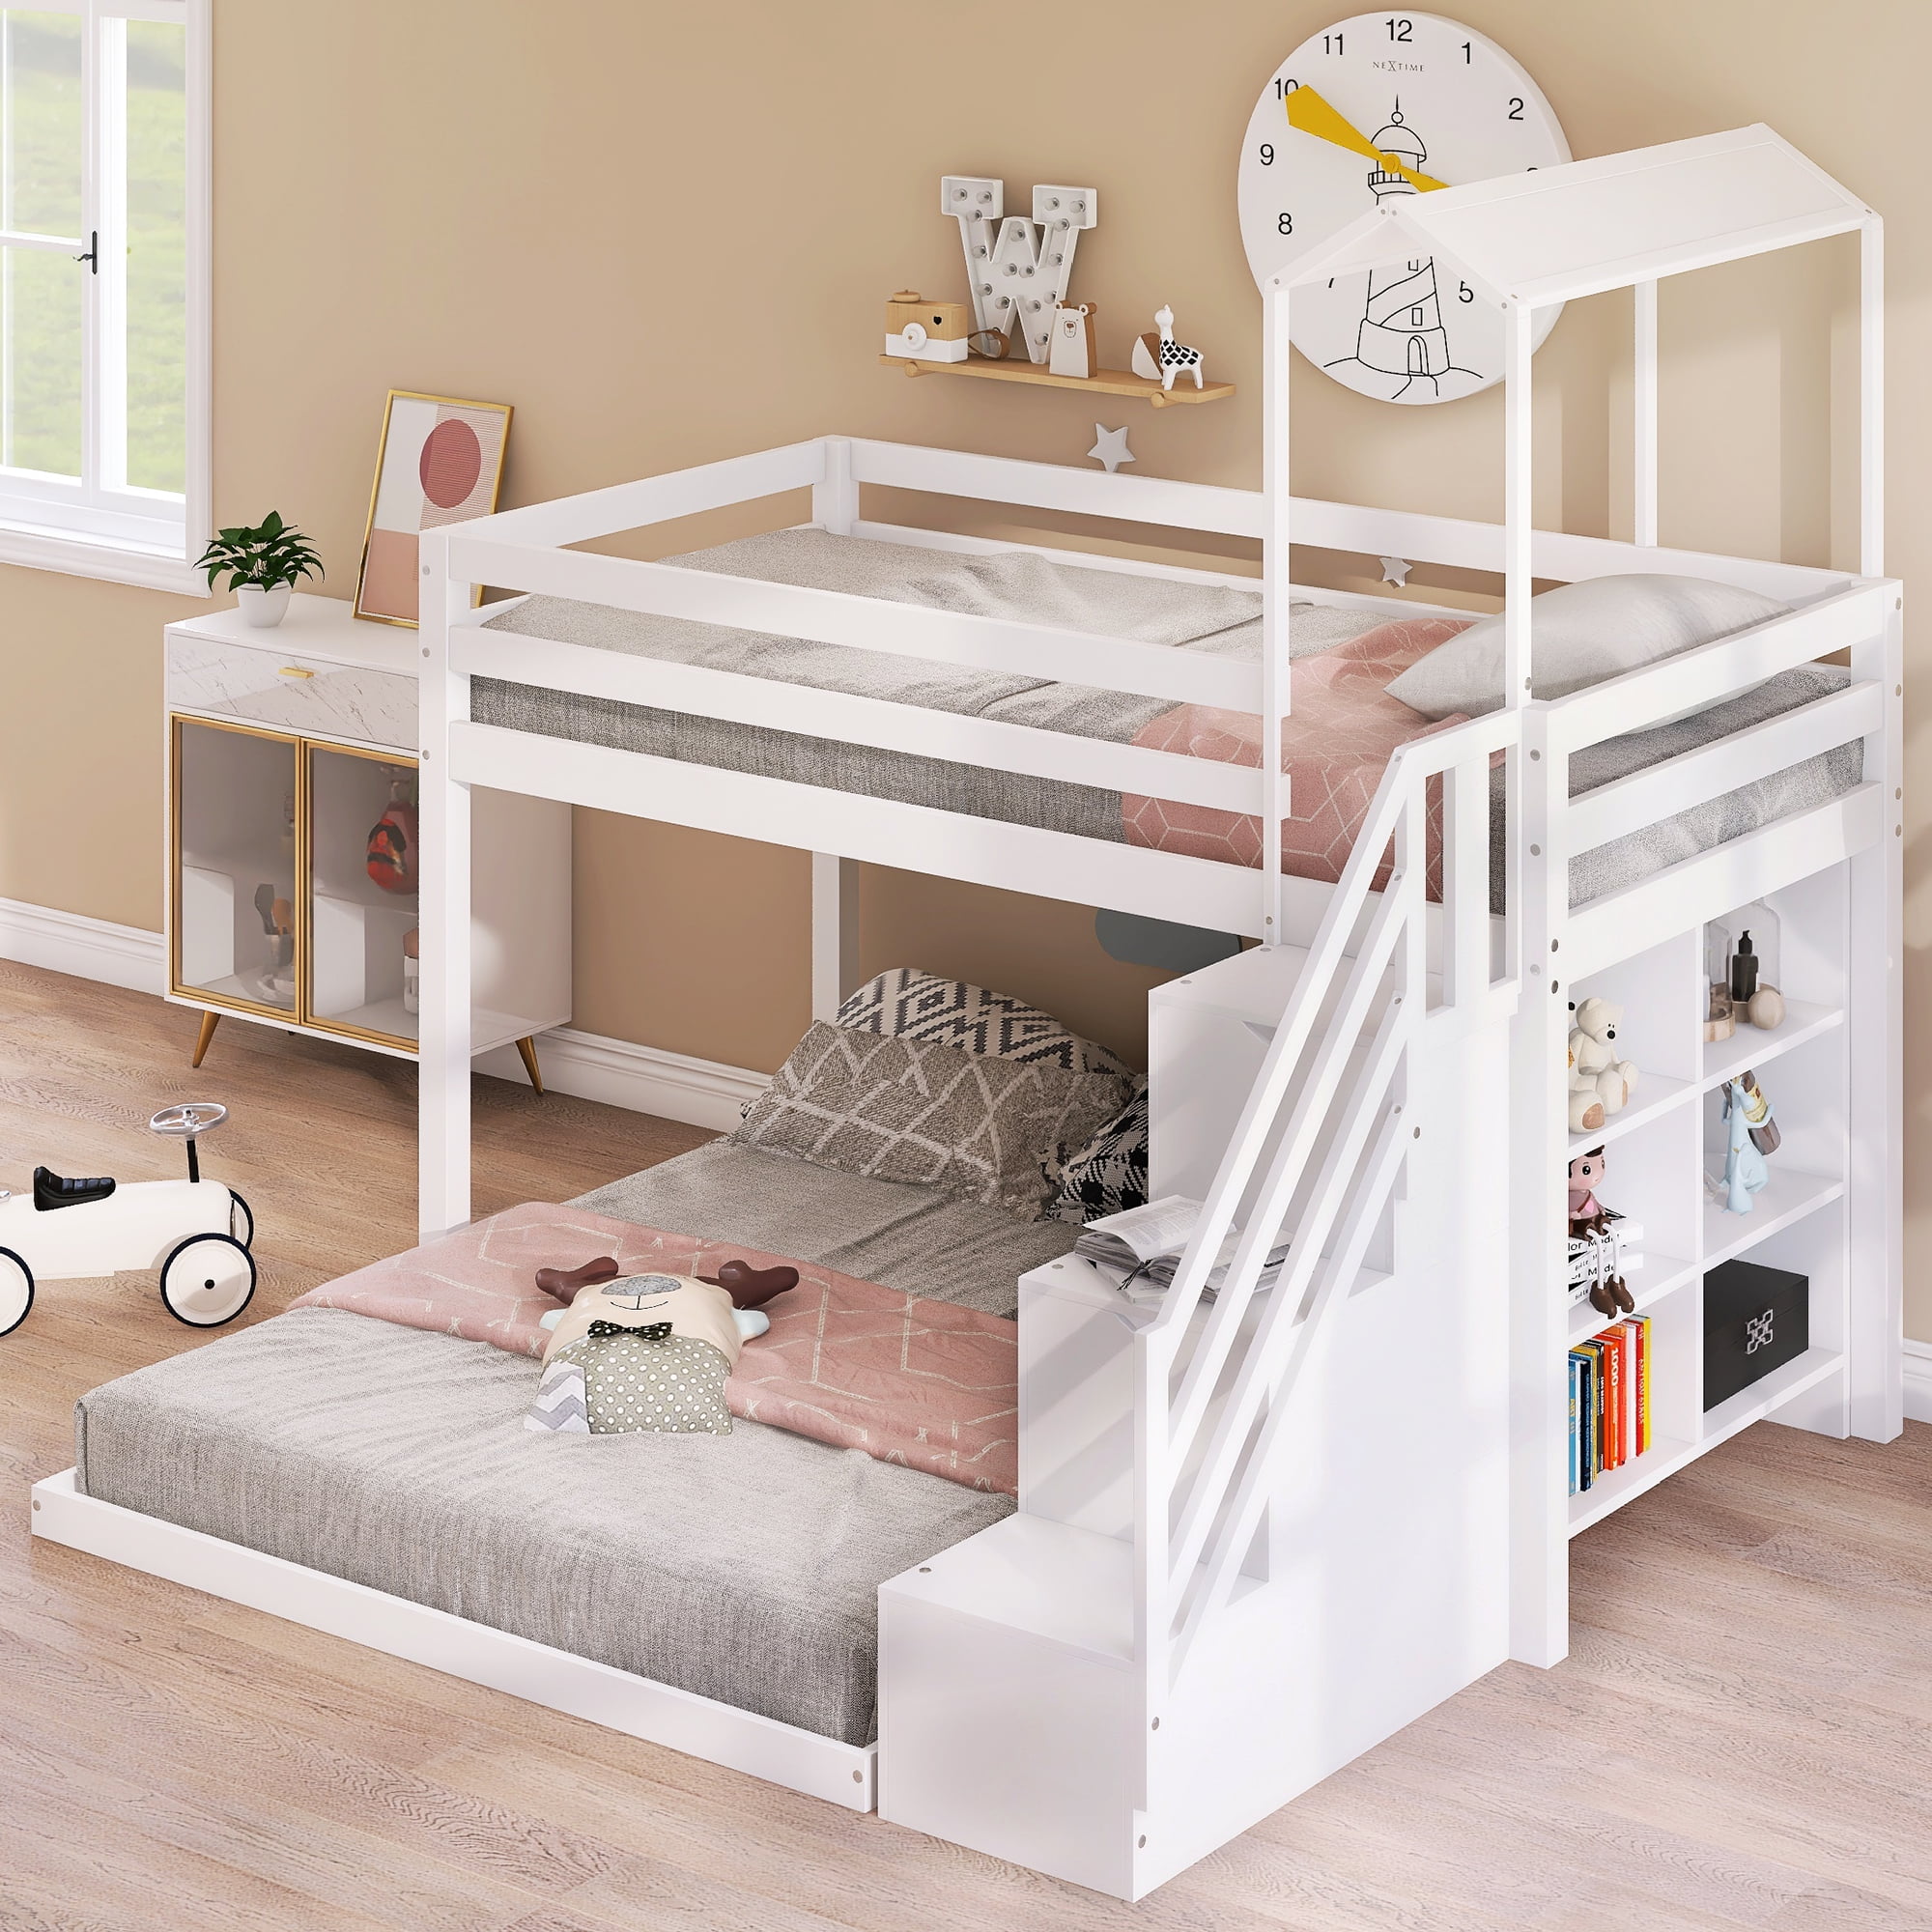 DreamBuck House Bunk Beds, Twin over Full Bunk Bed with Stairs and ...